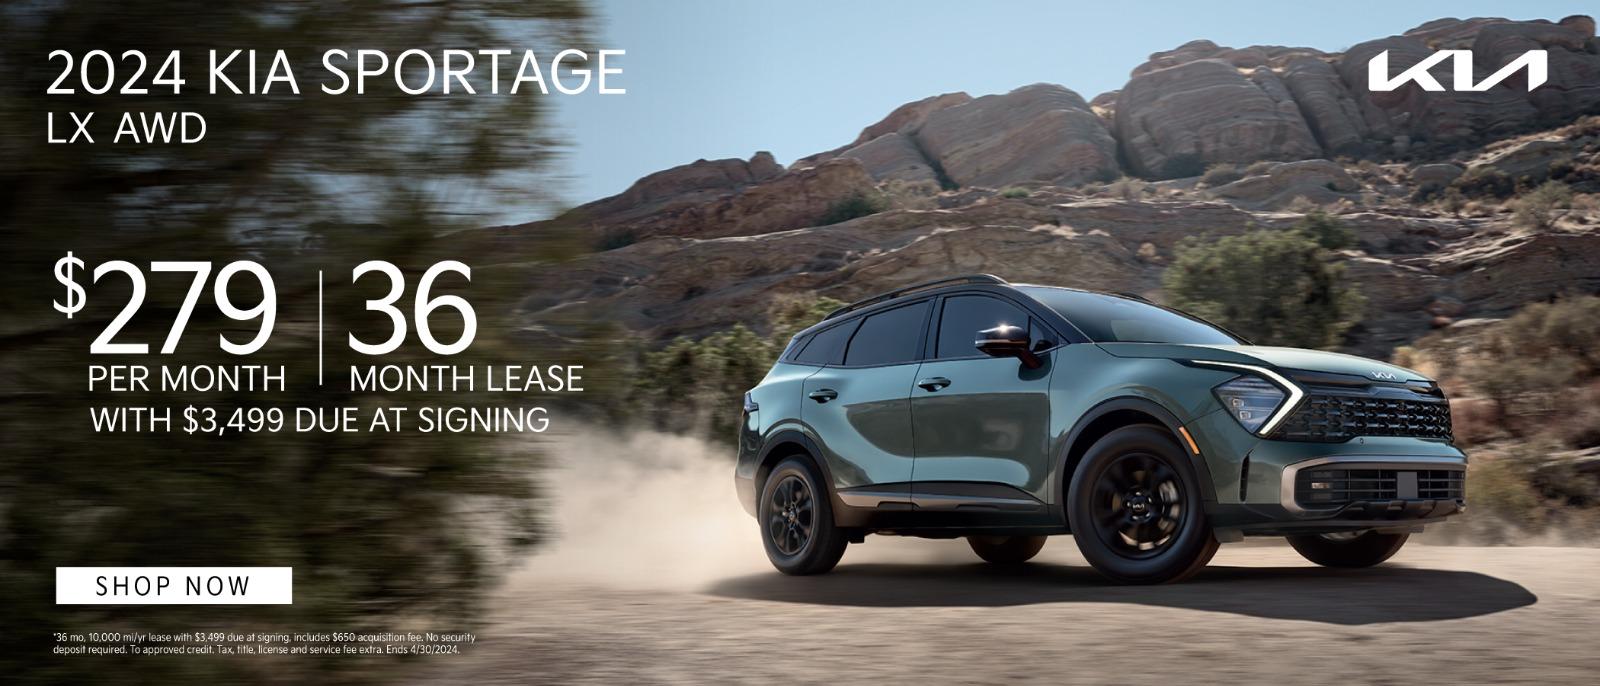 2024 Kia Sportage lease for $279 per month for 36 months